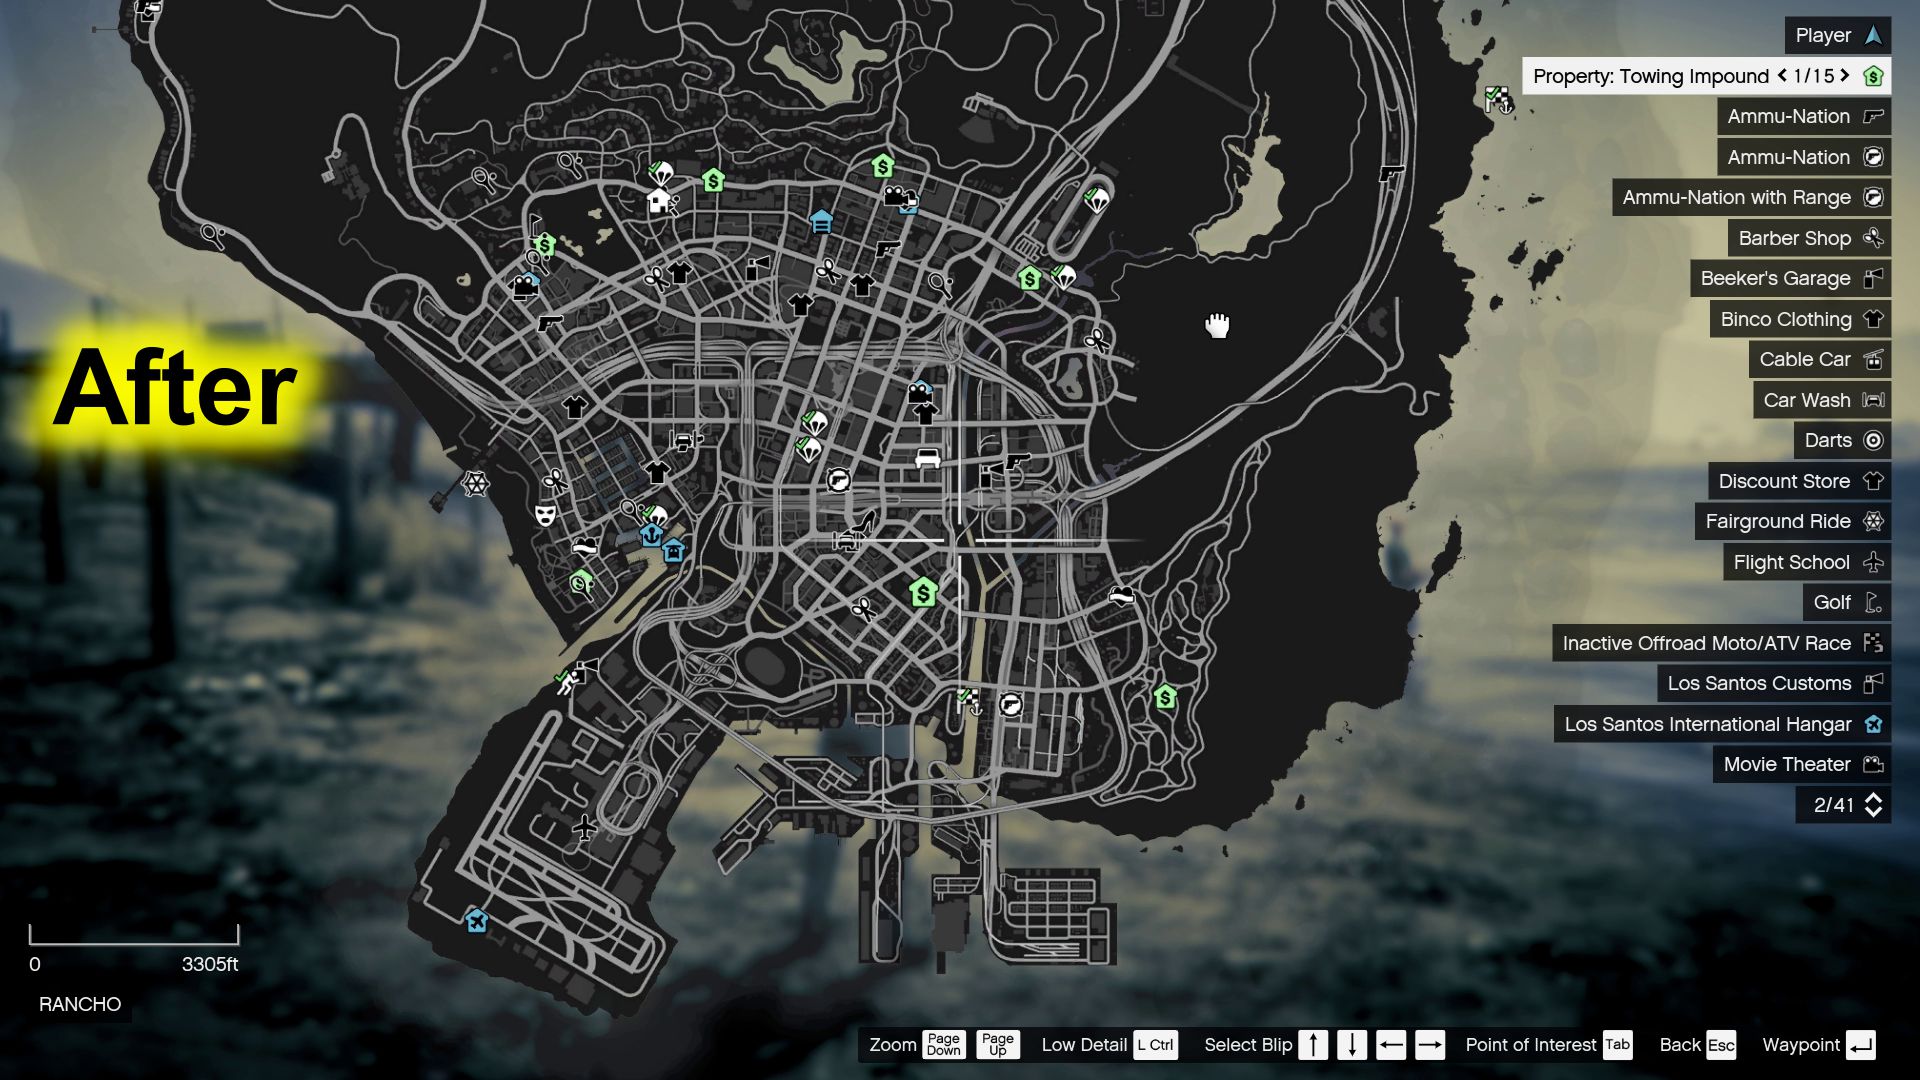 How To Unlock Or Open Full Map In GTA 5 PC Instantly